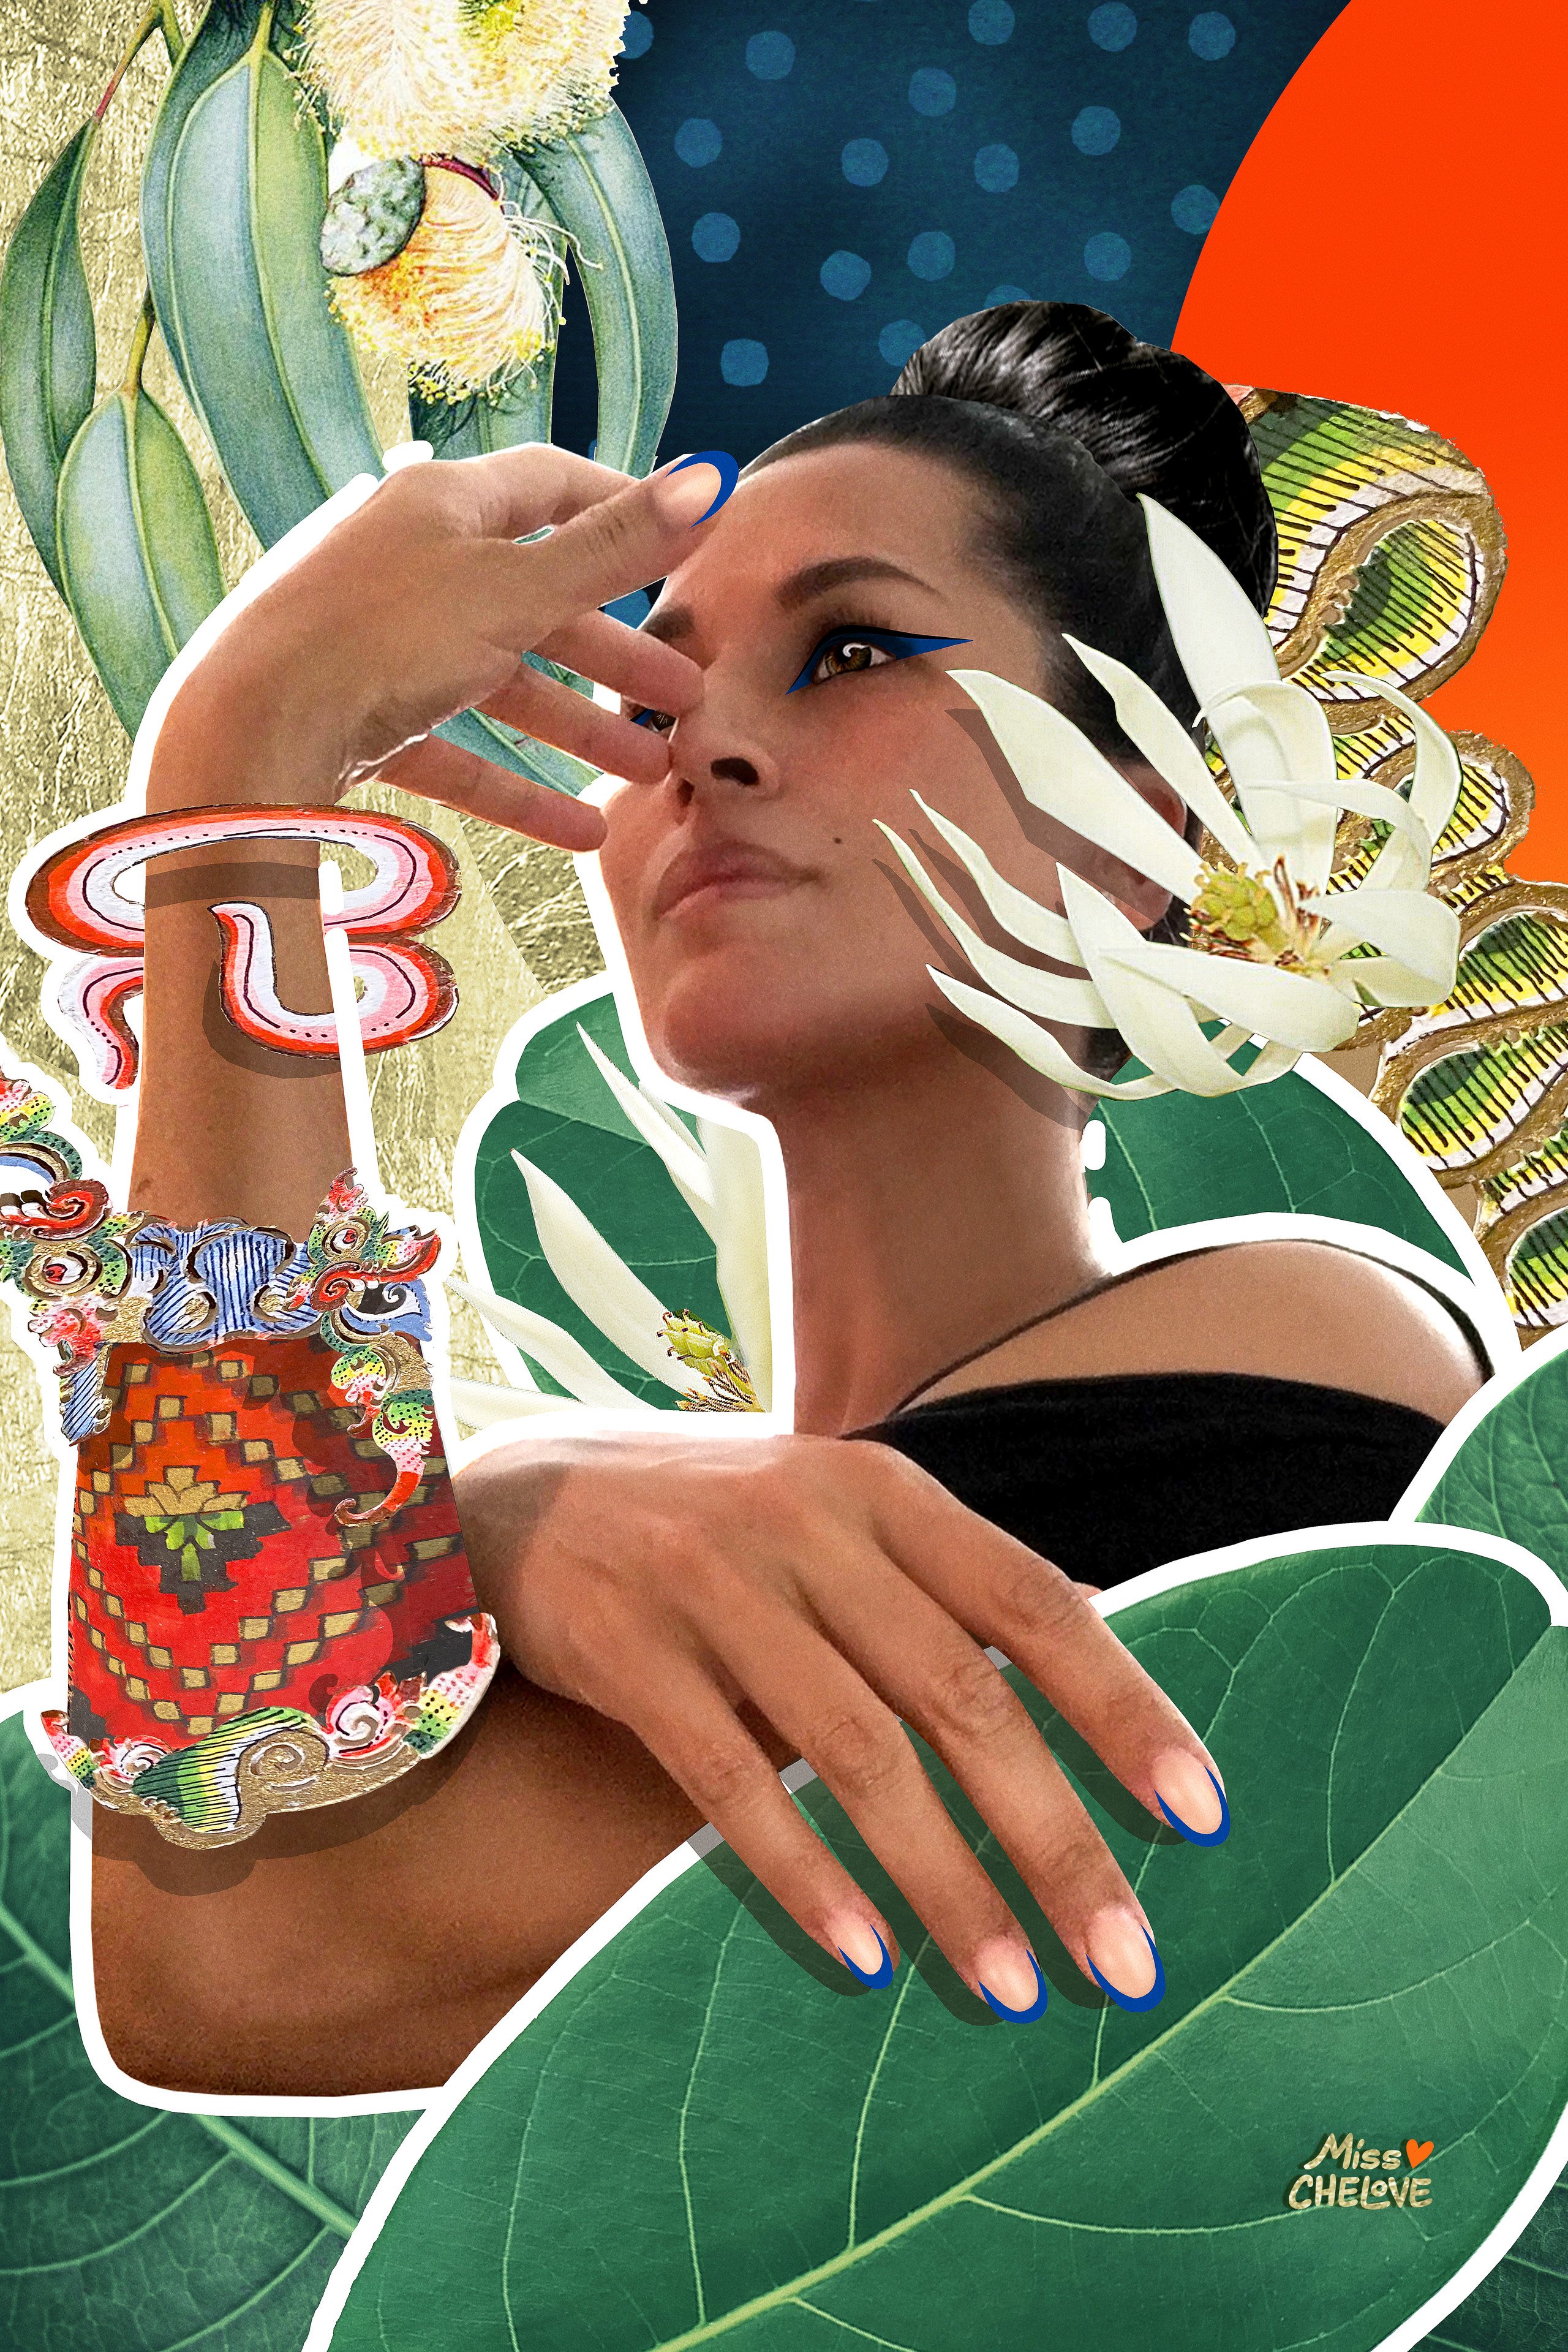 A woman’s head and shoulders are partially obscured by leaves, flora, and abstract graphics. She has medium-light skin tone and black hair worn in a high bun, and she looks up and to the side in a regal pose.